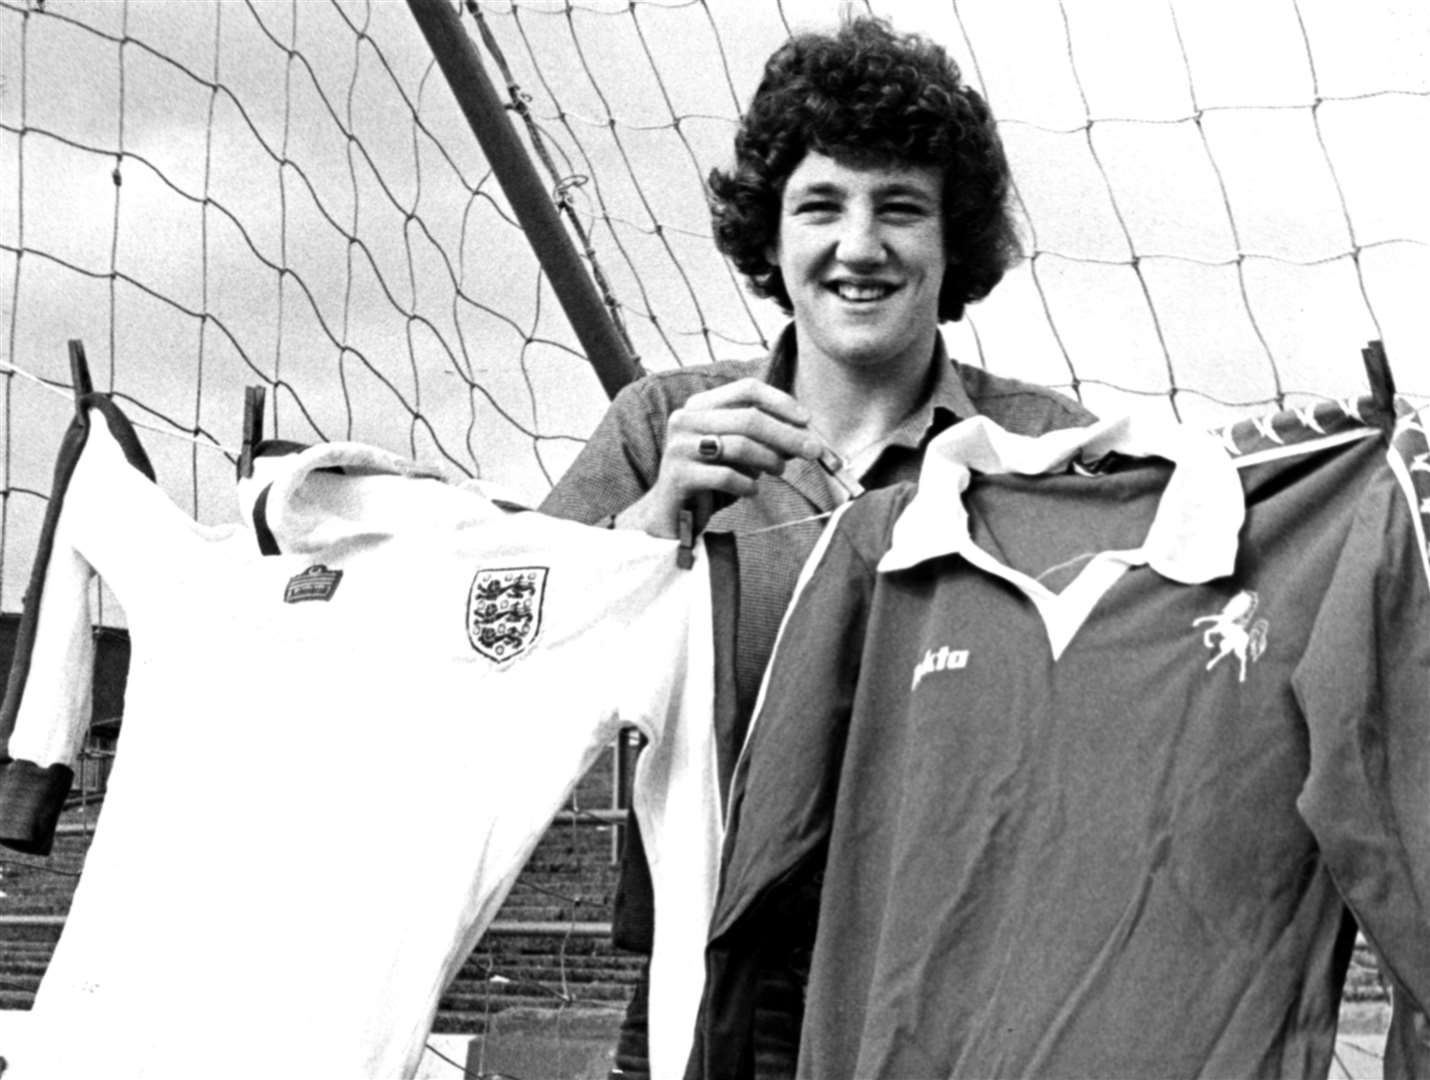 Steve Bruce played over 200 games for the Gills and represented England at youth level